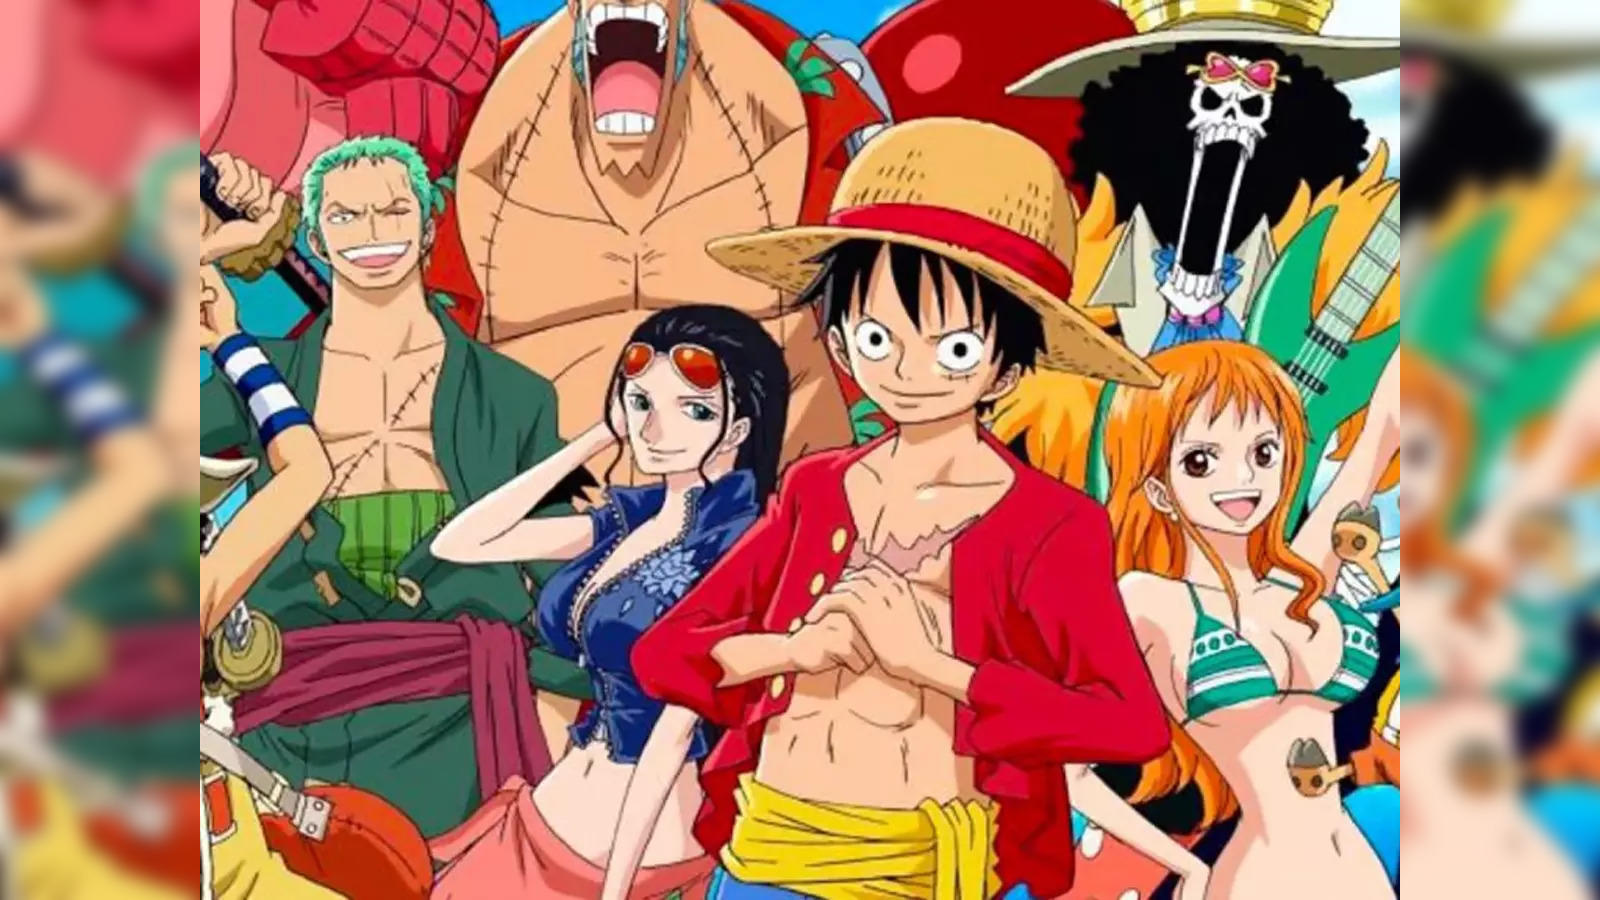 Netflix's 'One Piece's Production Gearing Up in South Africa